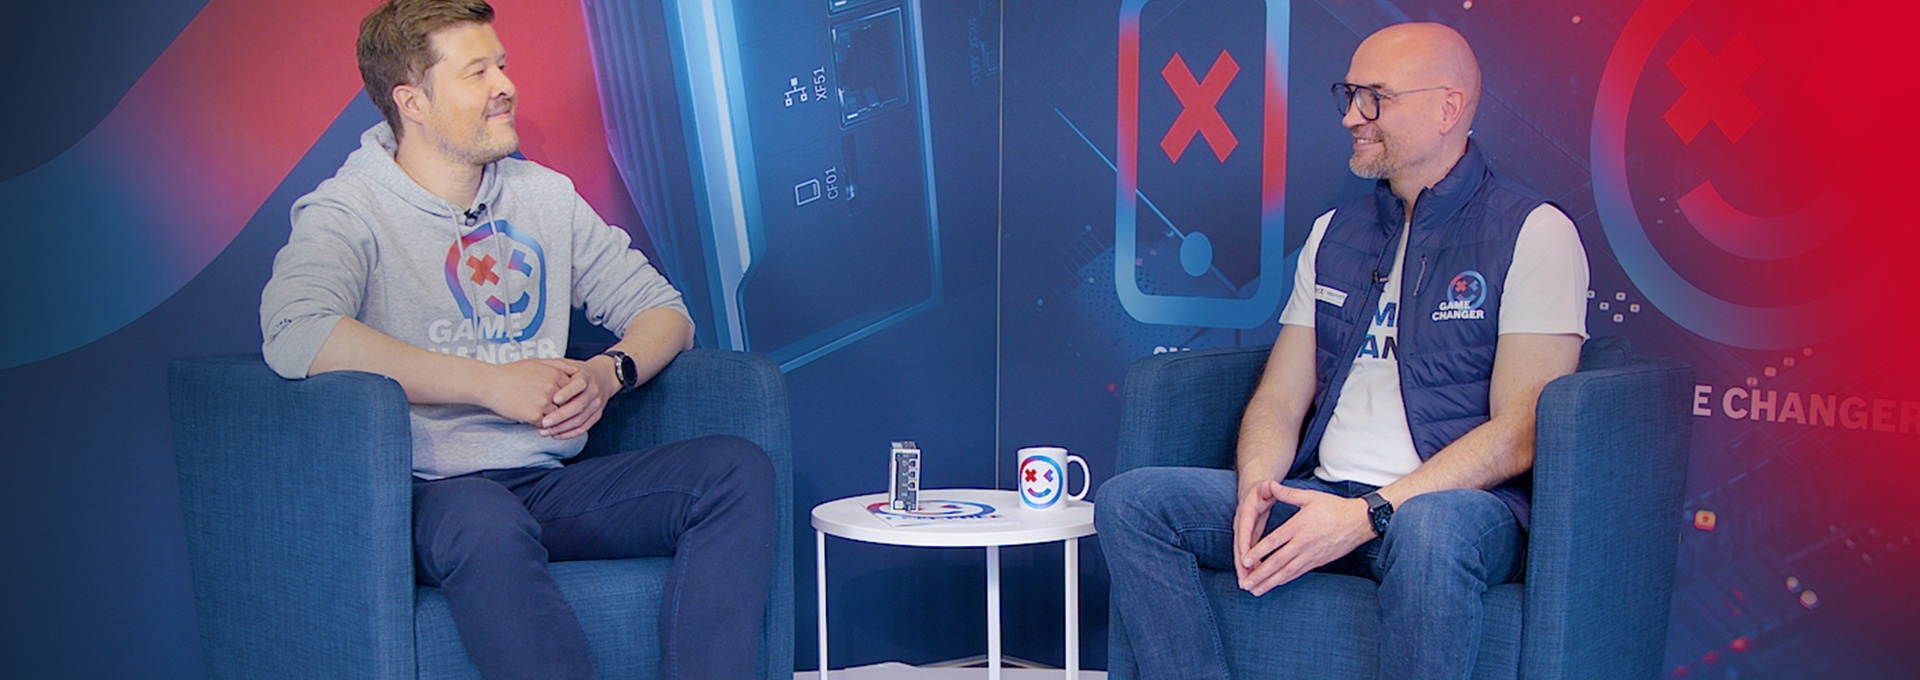 Host Christian Zentraf and his guest Michael Langfinger talk about security and why ctrlX AUTOMATION is a resilient system.